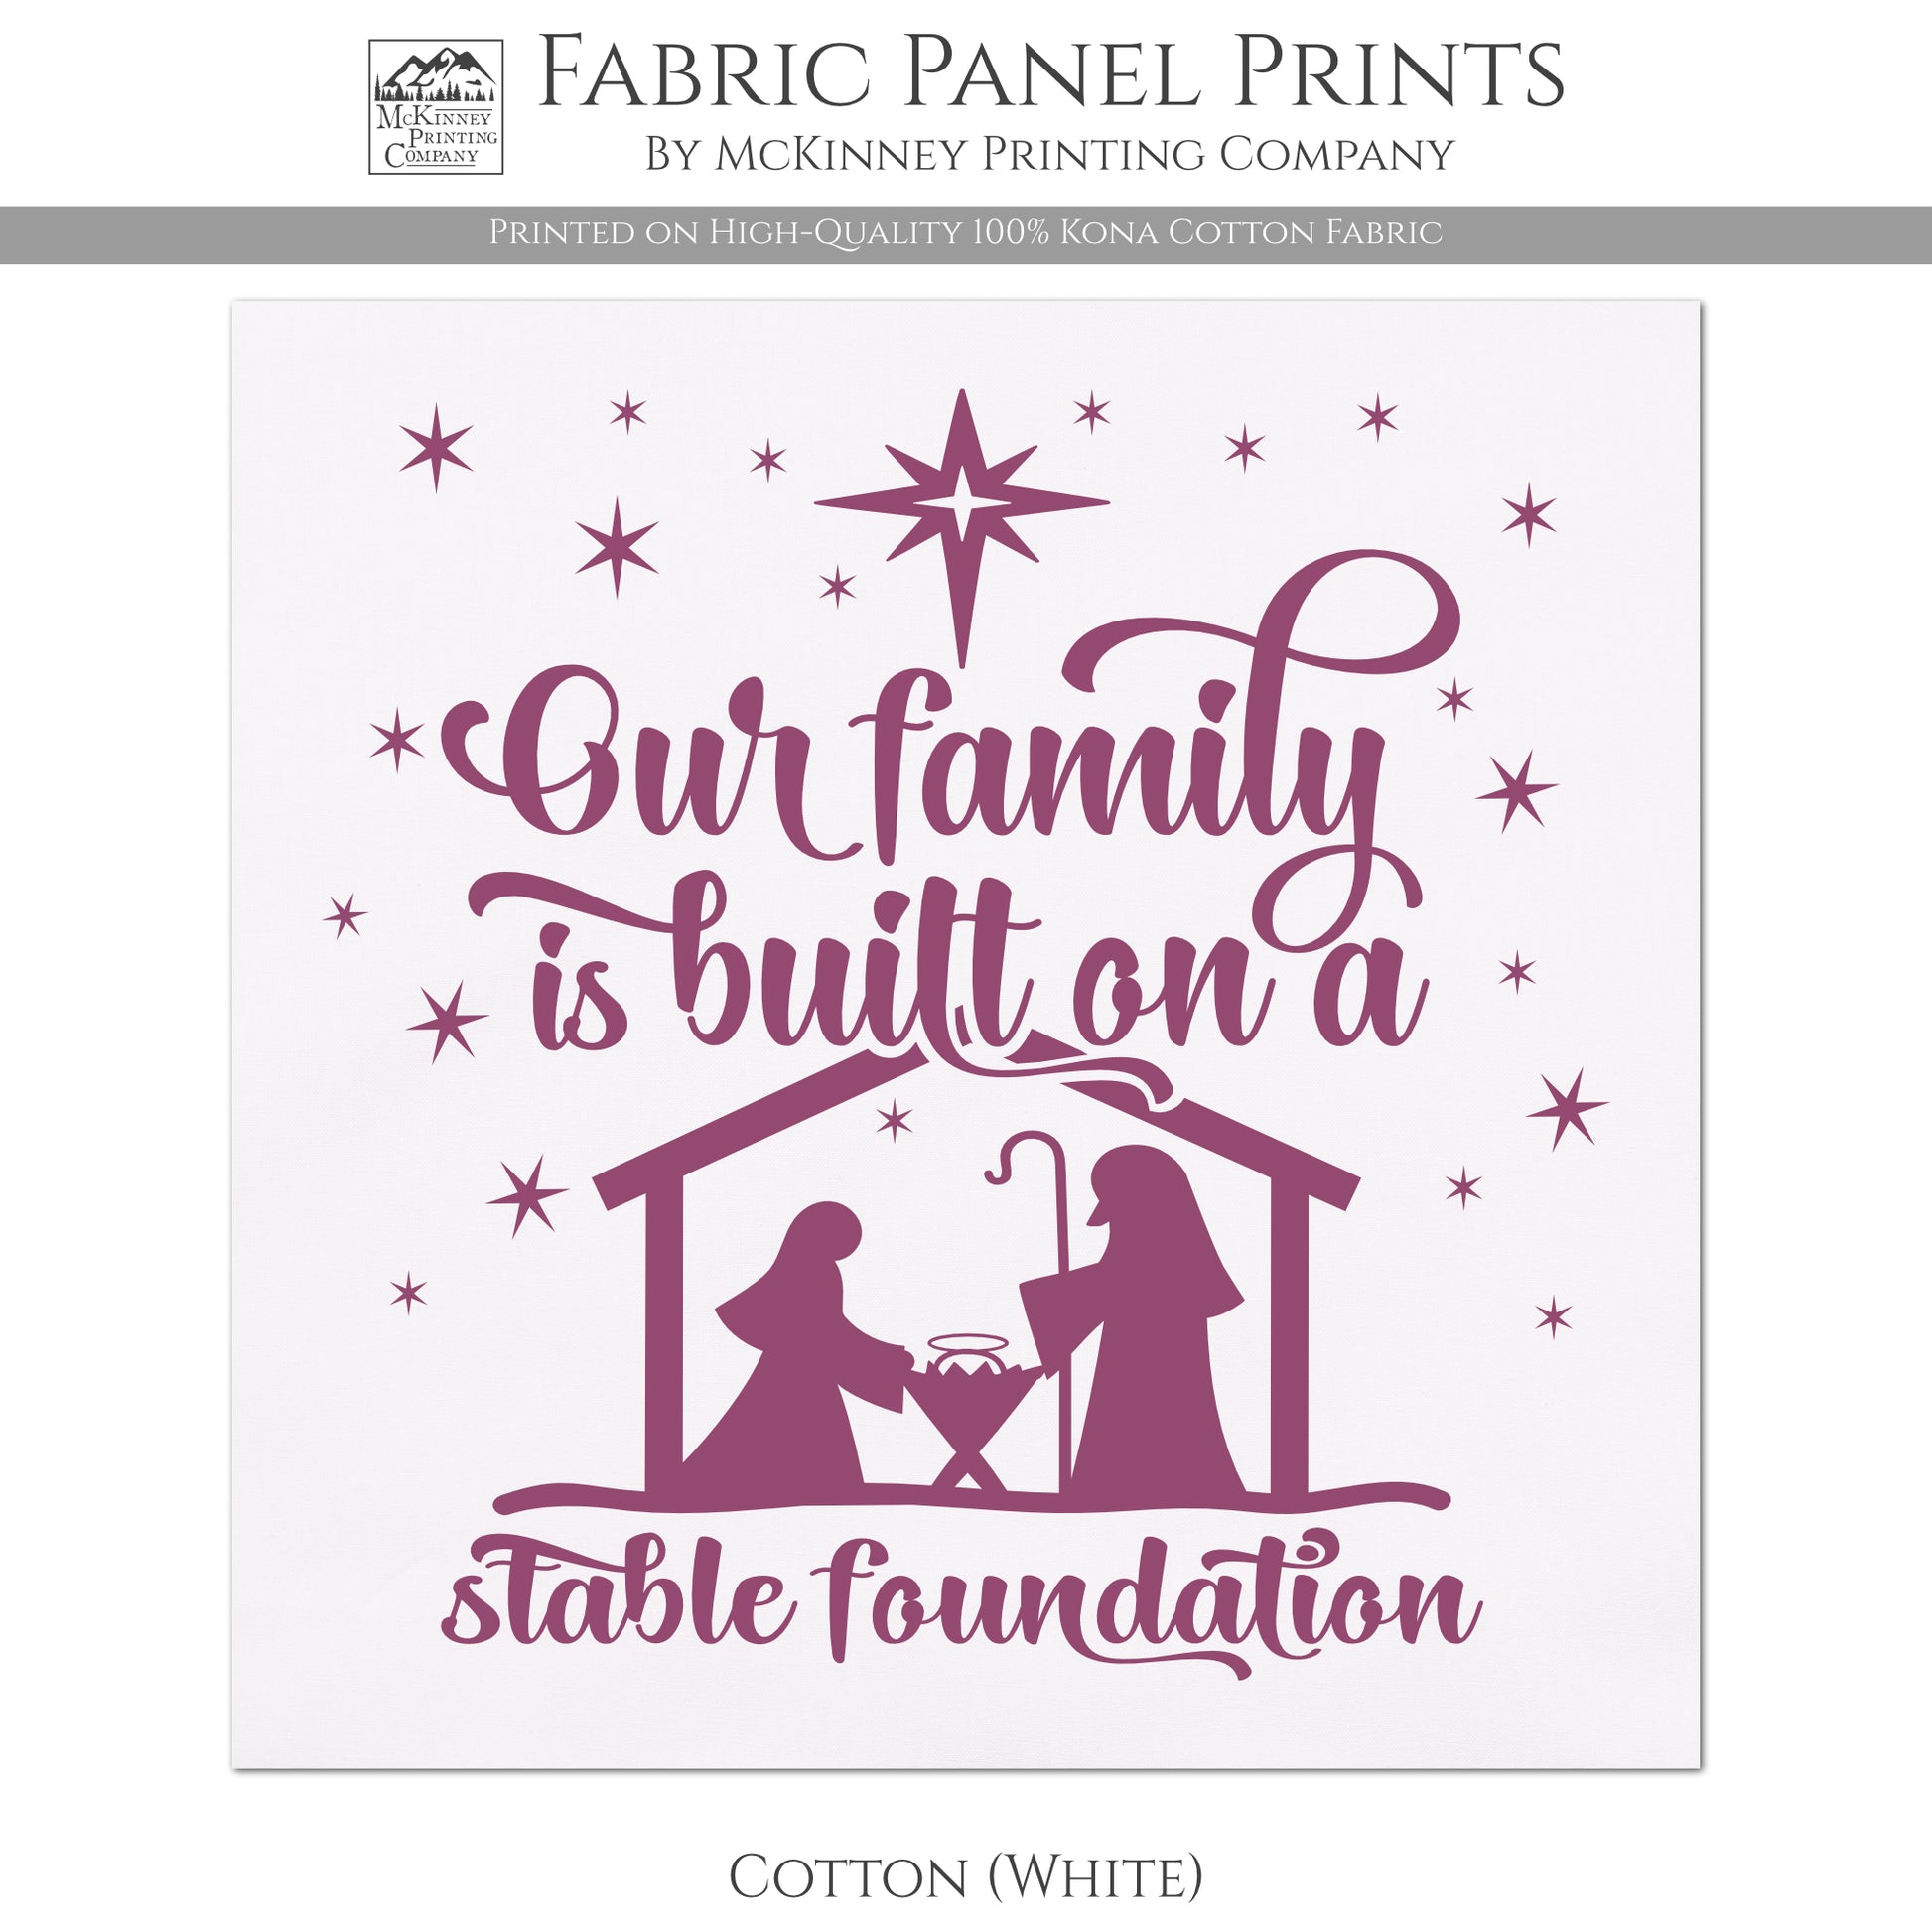 Nativity Scene, Our Family is built on a stable foundation - Christmas Fabric Panels, Quilt Block - Kona Cotton Fabric, White